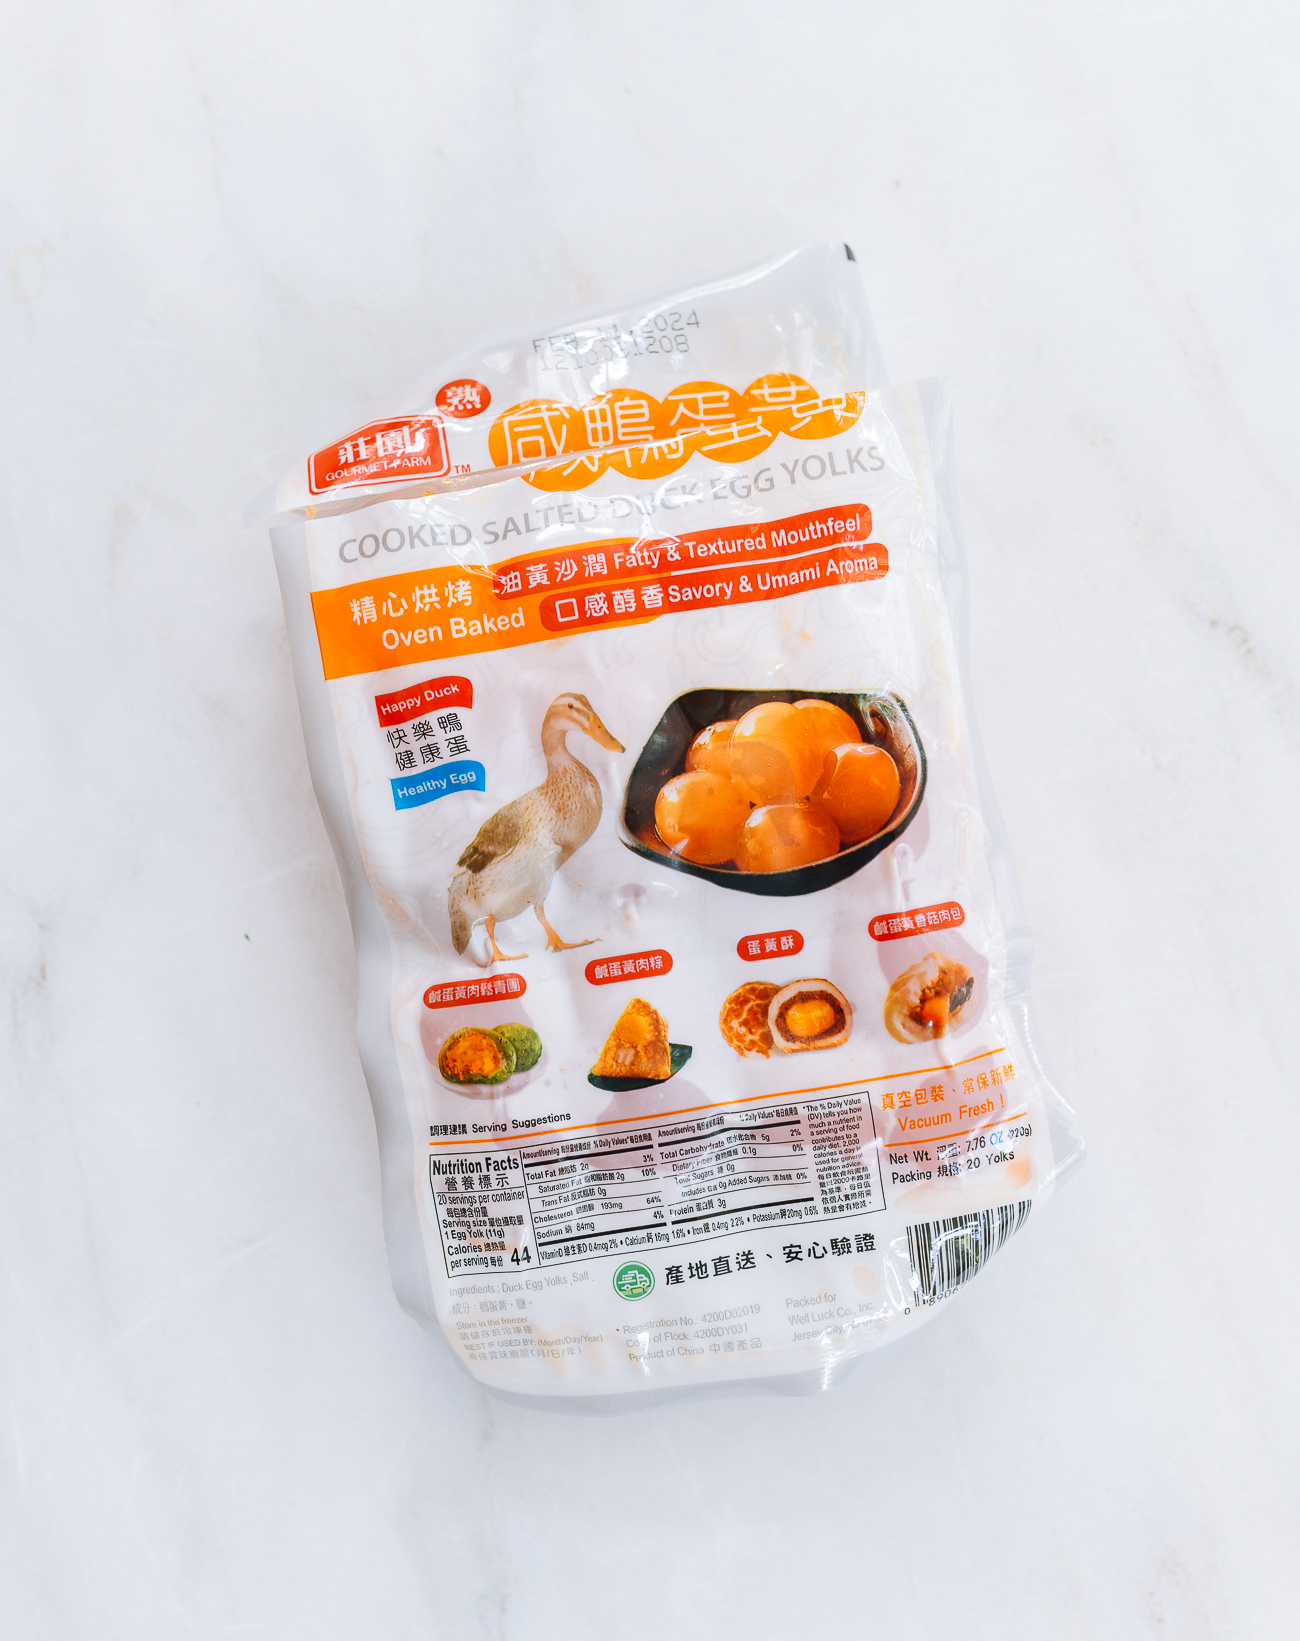 Package of cooked salted duck egg yolks